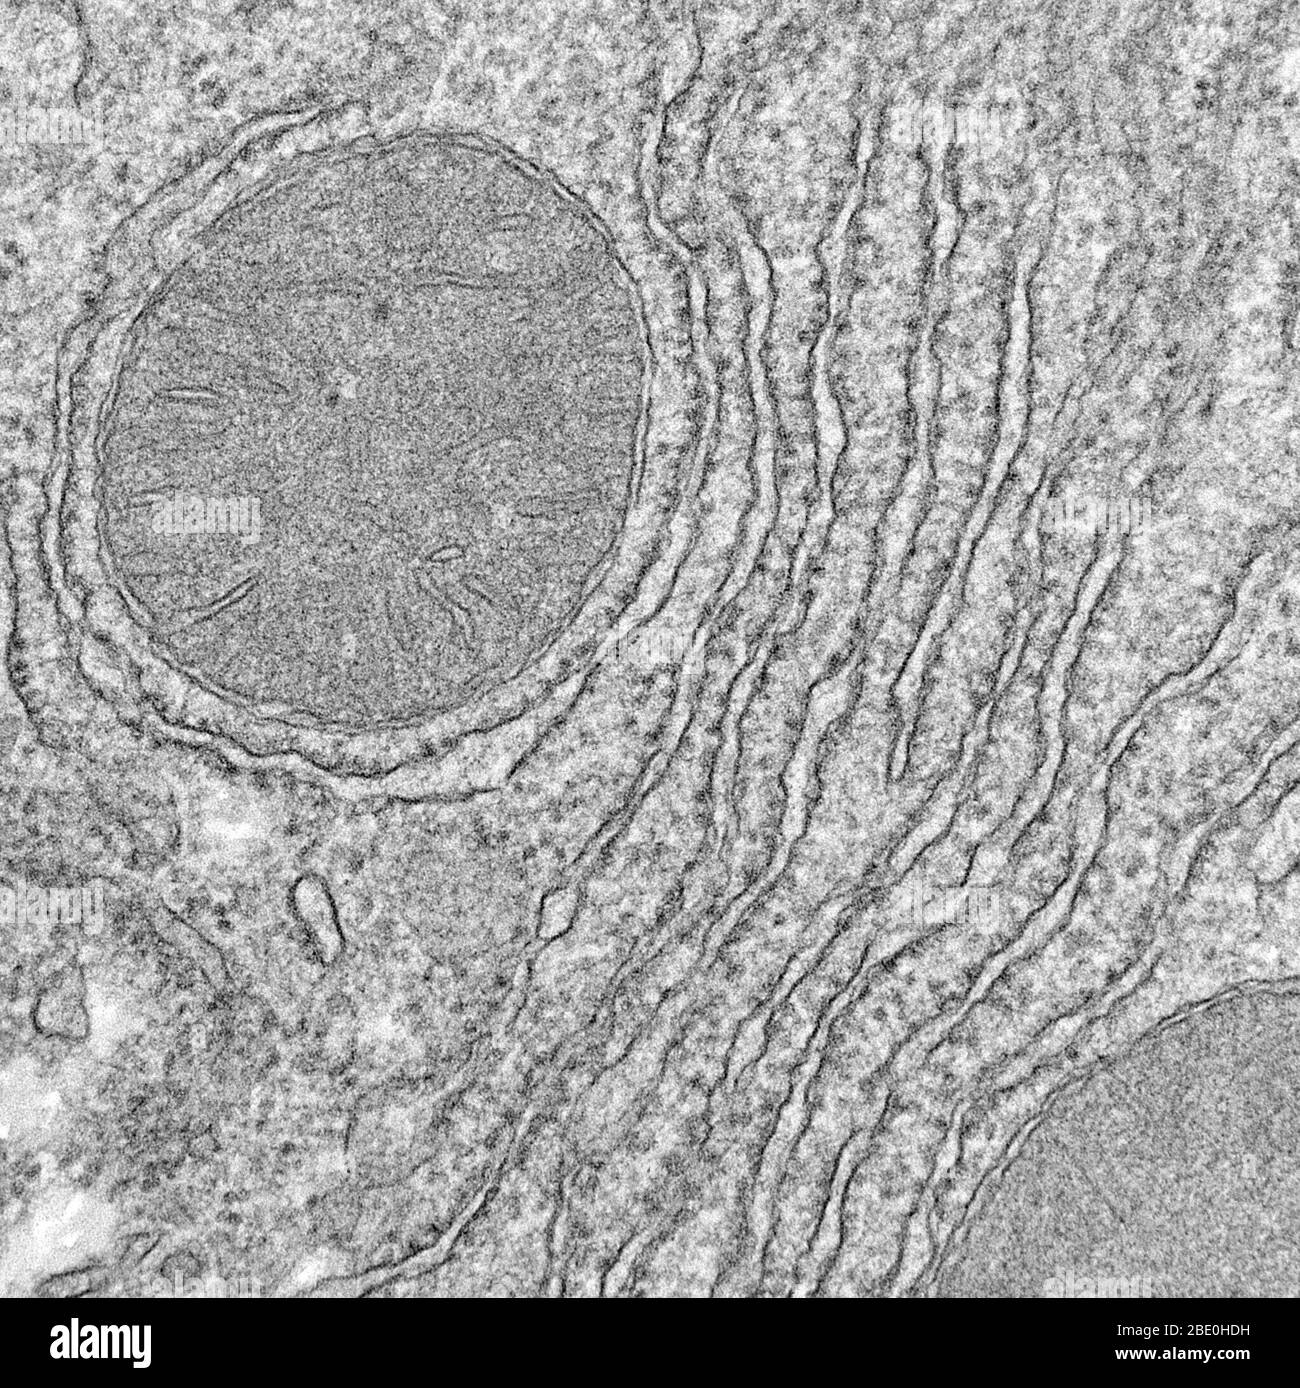 Transmission Electron Micrograph (TEM) showing mitochondria and rough endoplasmic reticulum. The mitochondrion (plural mitochondria) is a double membrane-bound organelle found in all eukaryotic organisms. Mitochondria generate most of the cell's supply of adenosine triphosphate (ATP), used as a source of chemical energy. Unless specifically stained, they are not visible. In addition to supplying cellular energy, mitochondria are involved in other tasks, such as signaling, cellular differentiation, and cell death, as well as maintaining control of the cell cycle and cell growth. The endoplasmic Stock Photo